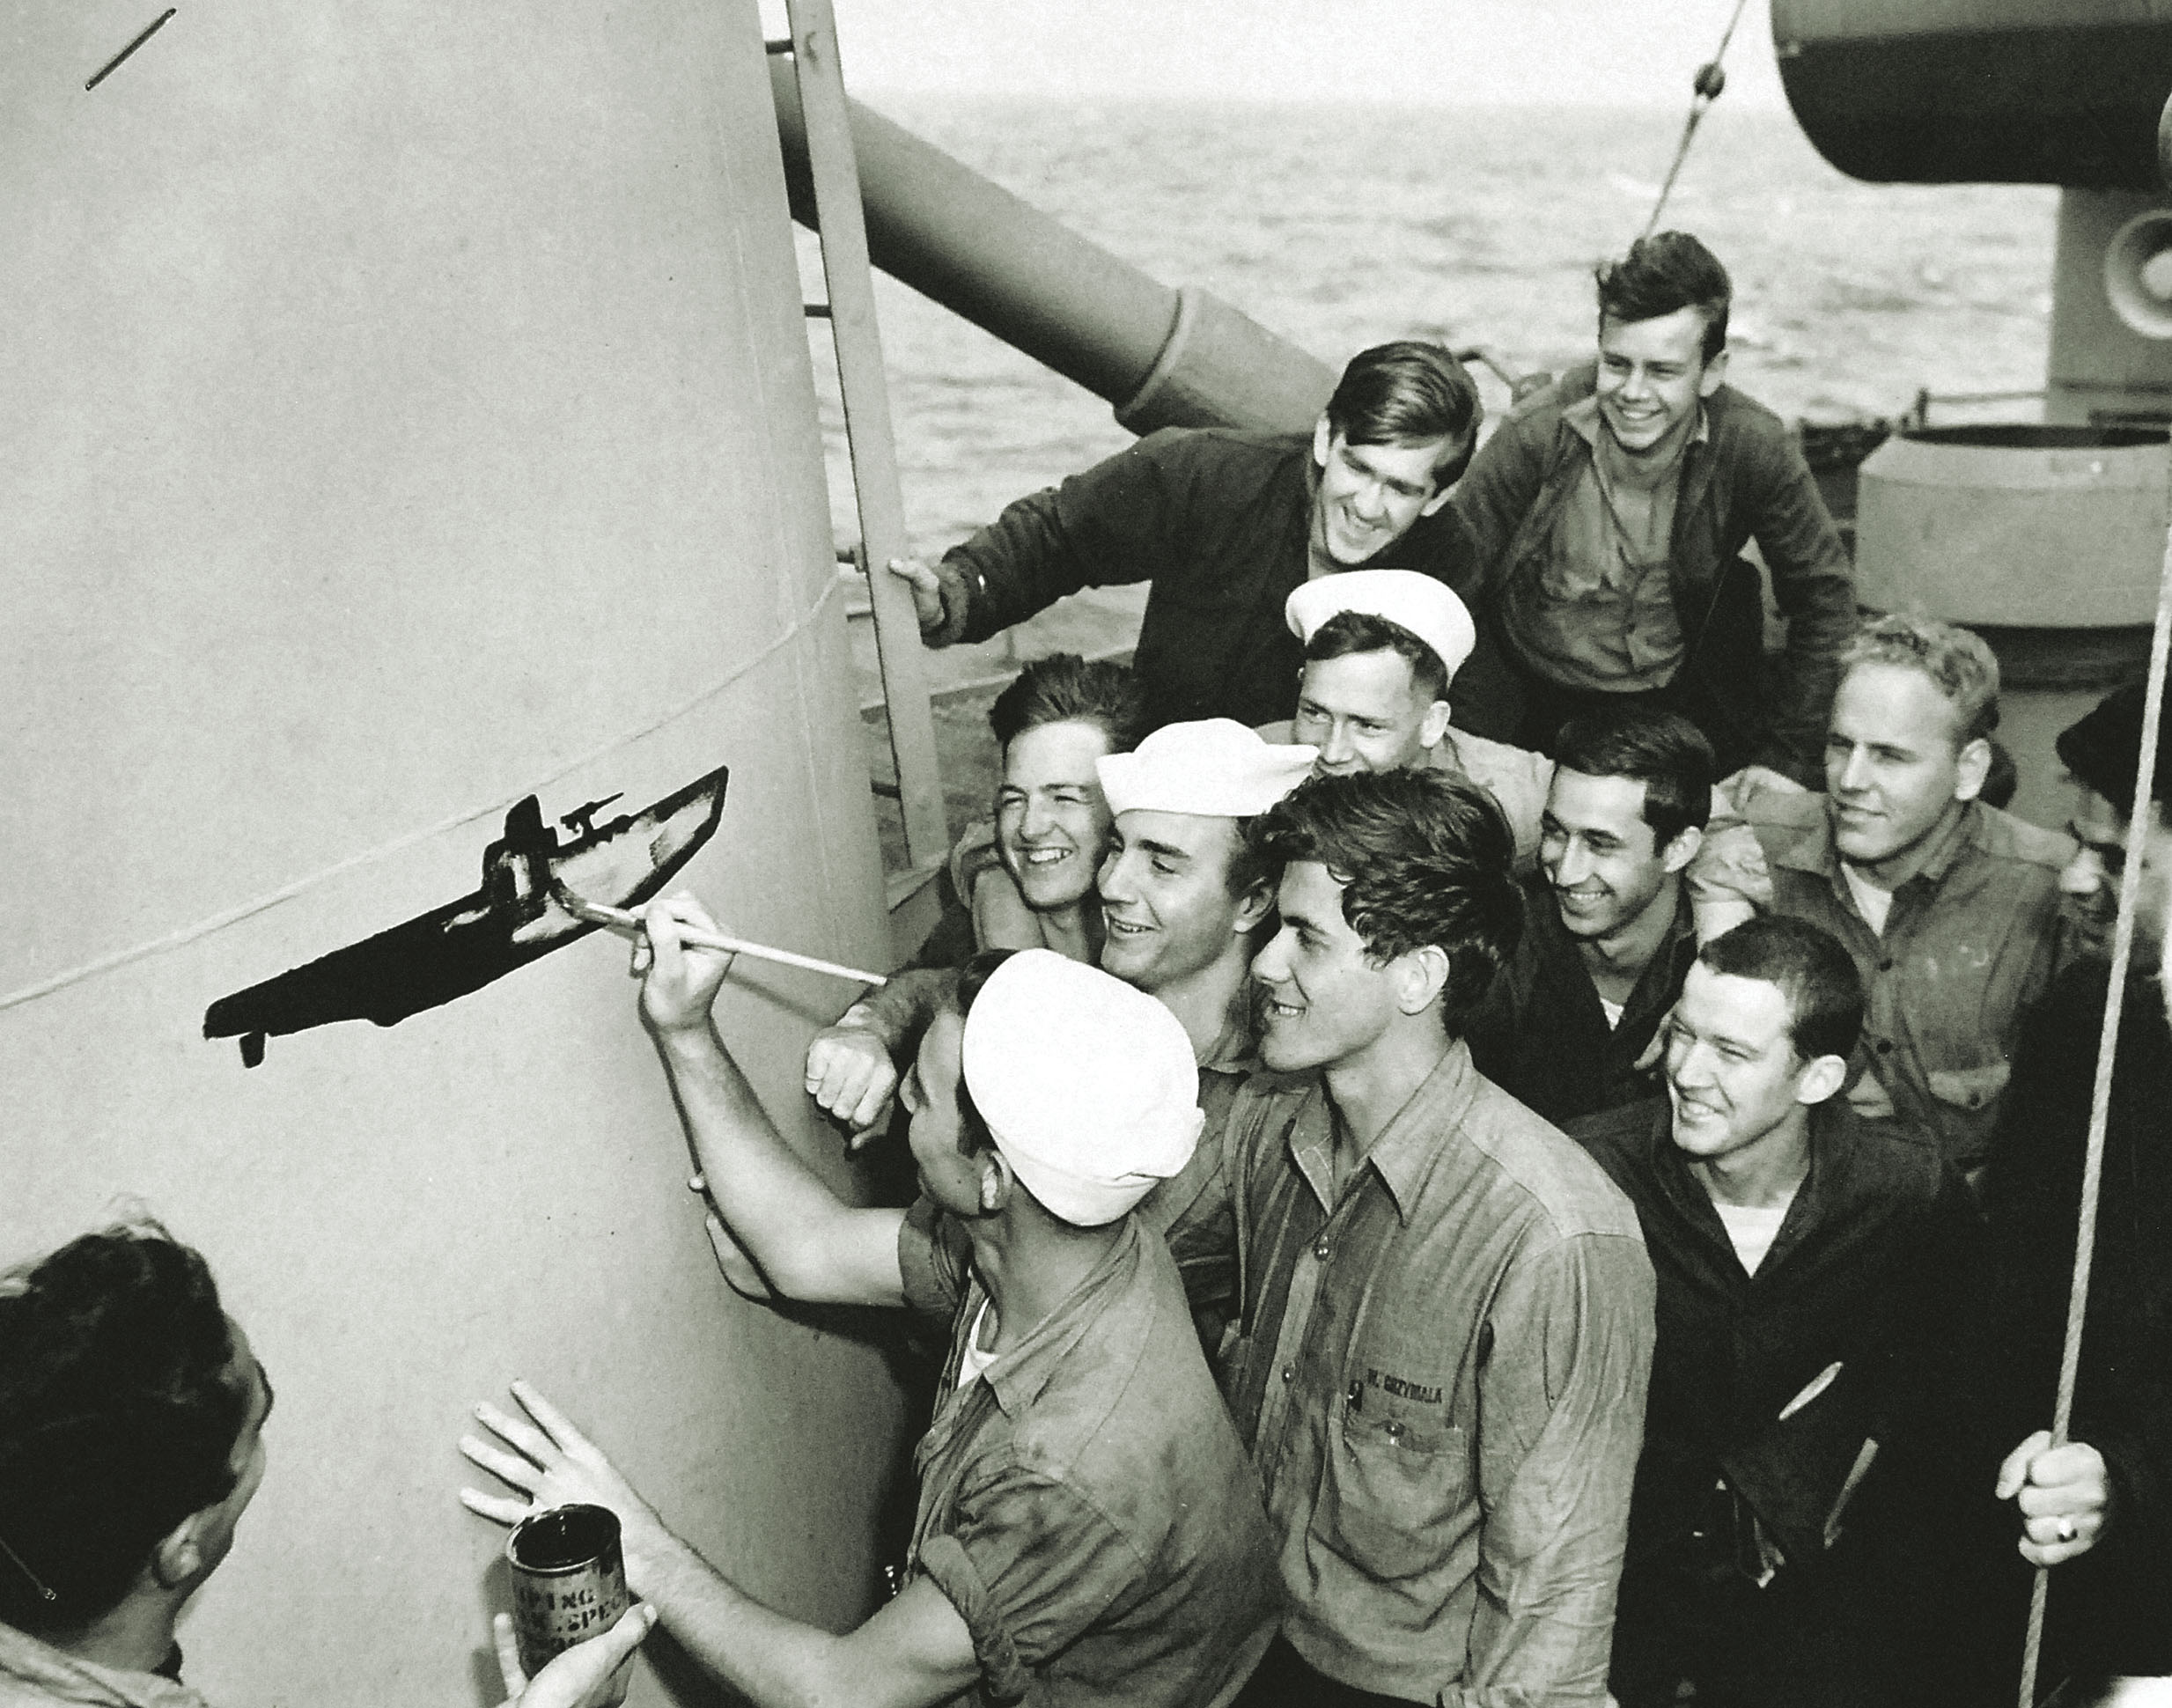 Jubilant over the sinking of U-853, Moberly’s Coast Guard Reserve crew gathers to watch a crewmate paint a victory symbol on the frigate’s funnel. / U.S. Coast Guard